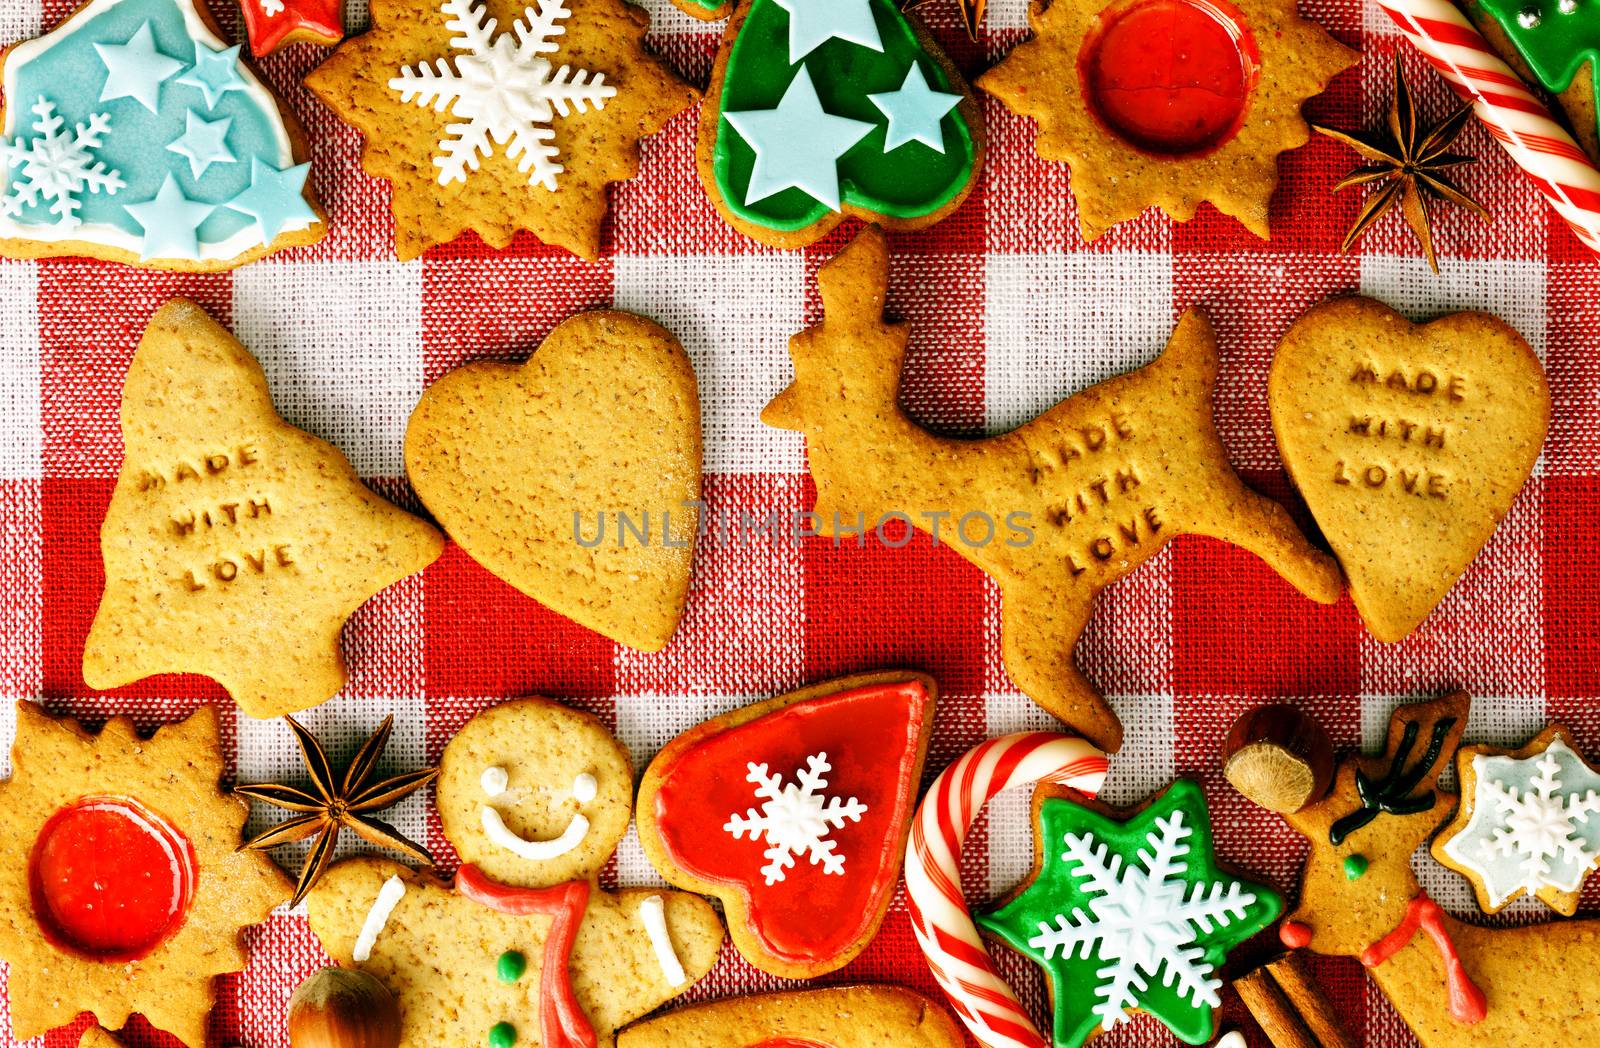 Christmas gingerbread cookies over tablecloth